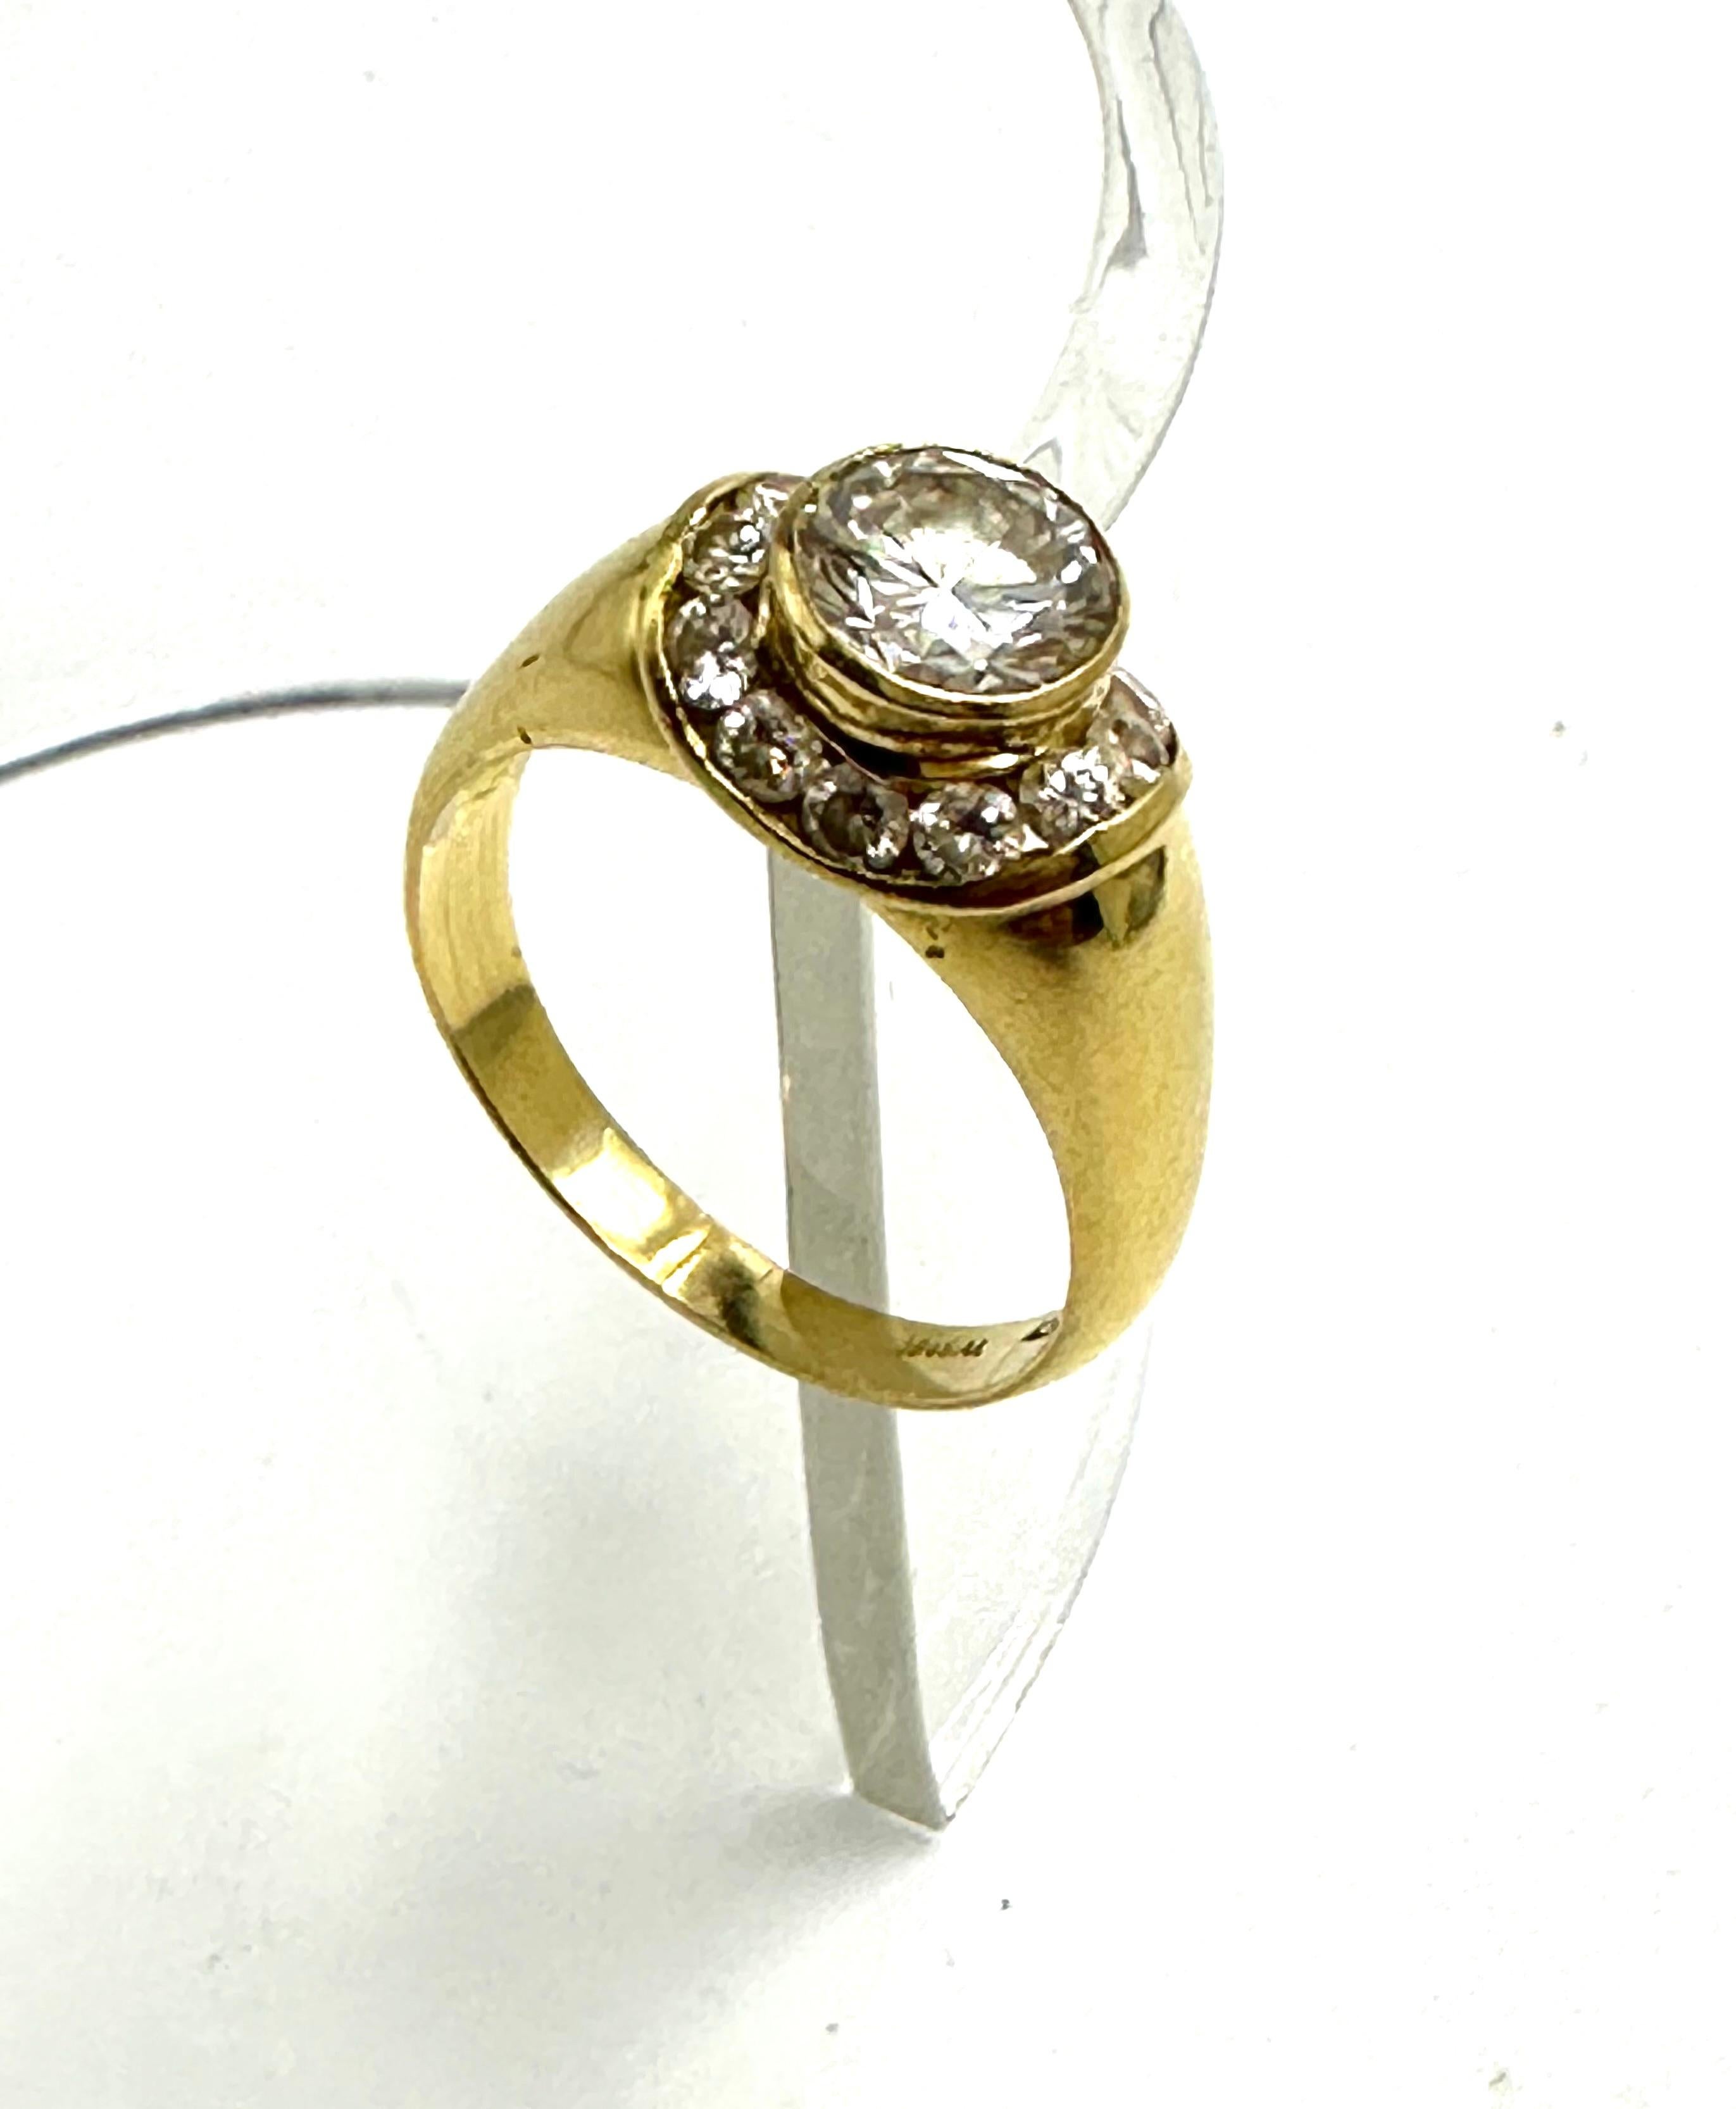 Exclusive ring made in Italy from 18K yellow gold.
It bears a brilliant-cut natural diamond (ct. 1.25 J VVS) surrounded by other natural diamonds (ct. 0.06 each) of similar color characteristics.
Elegant and sporty at the same time, this ring